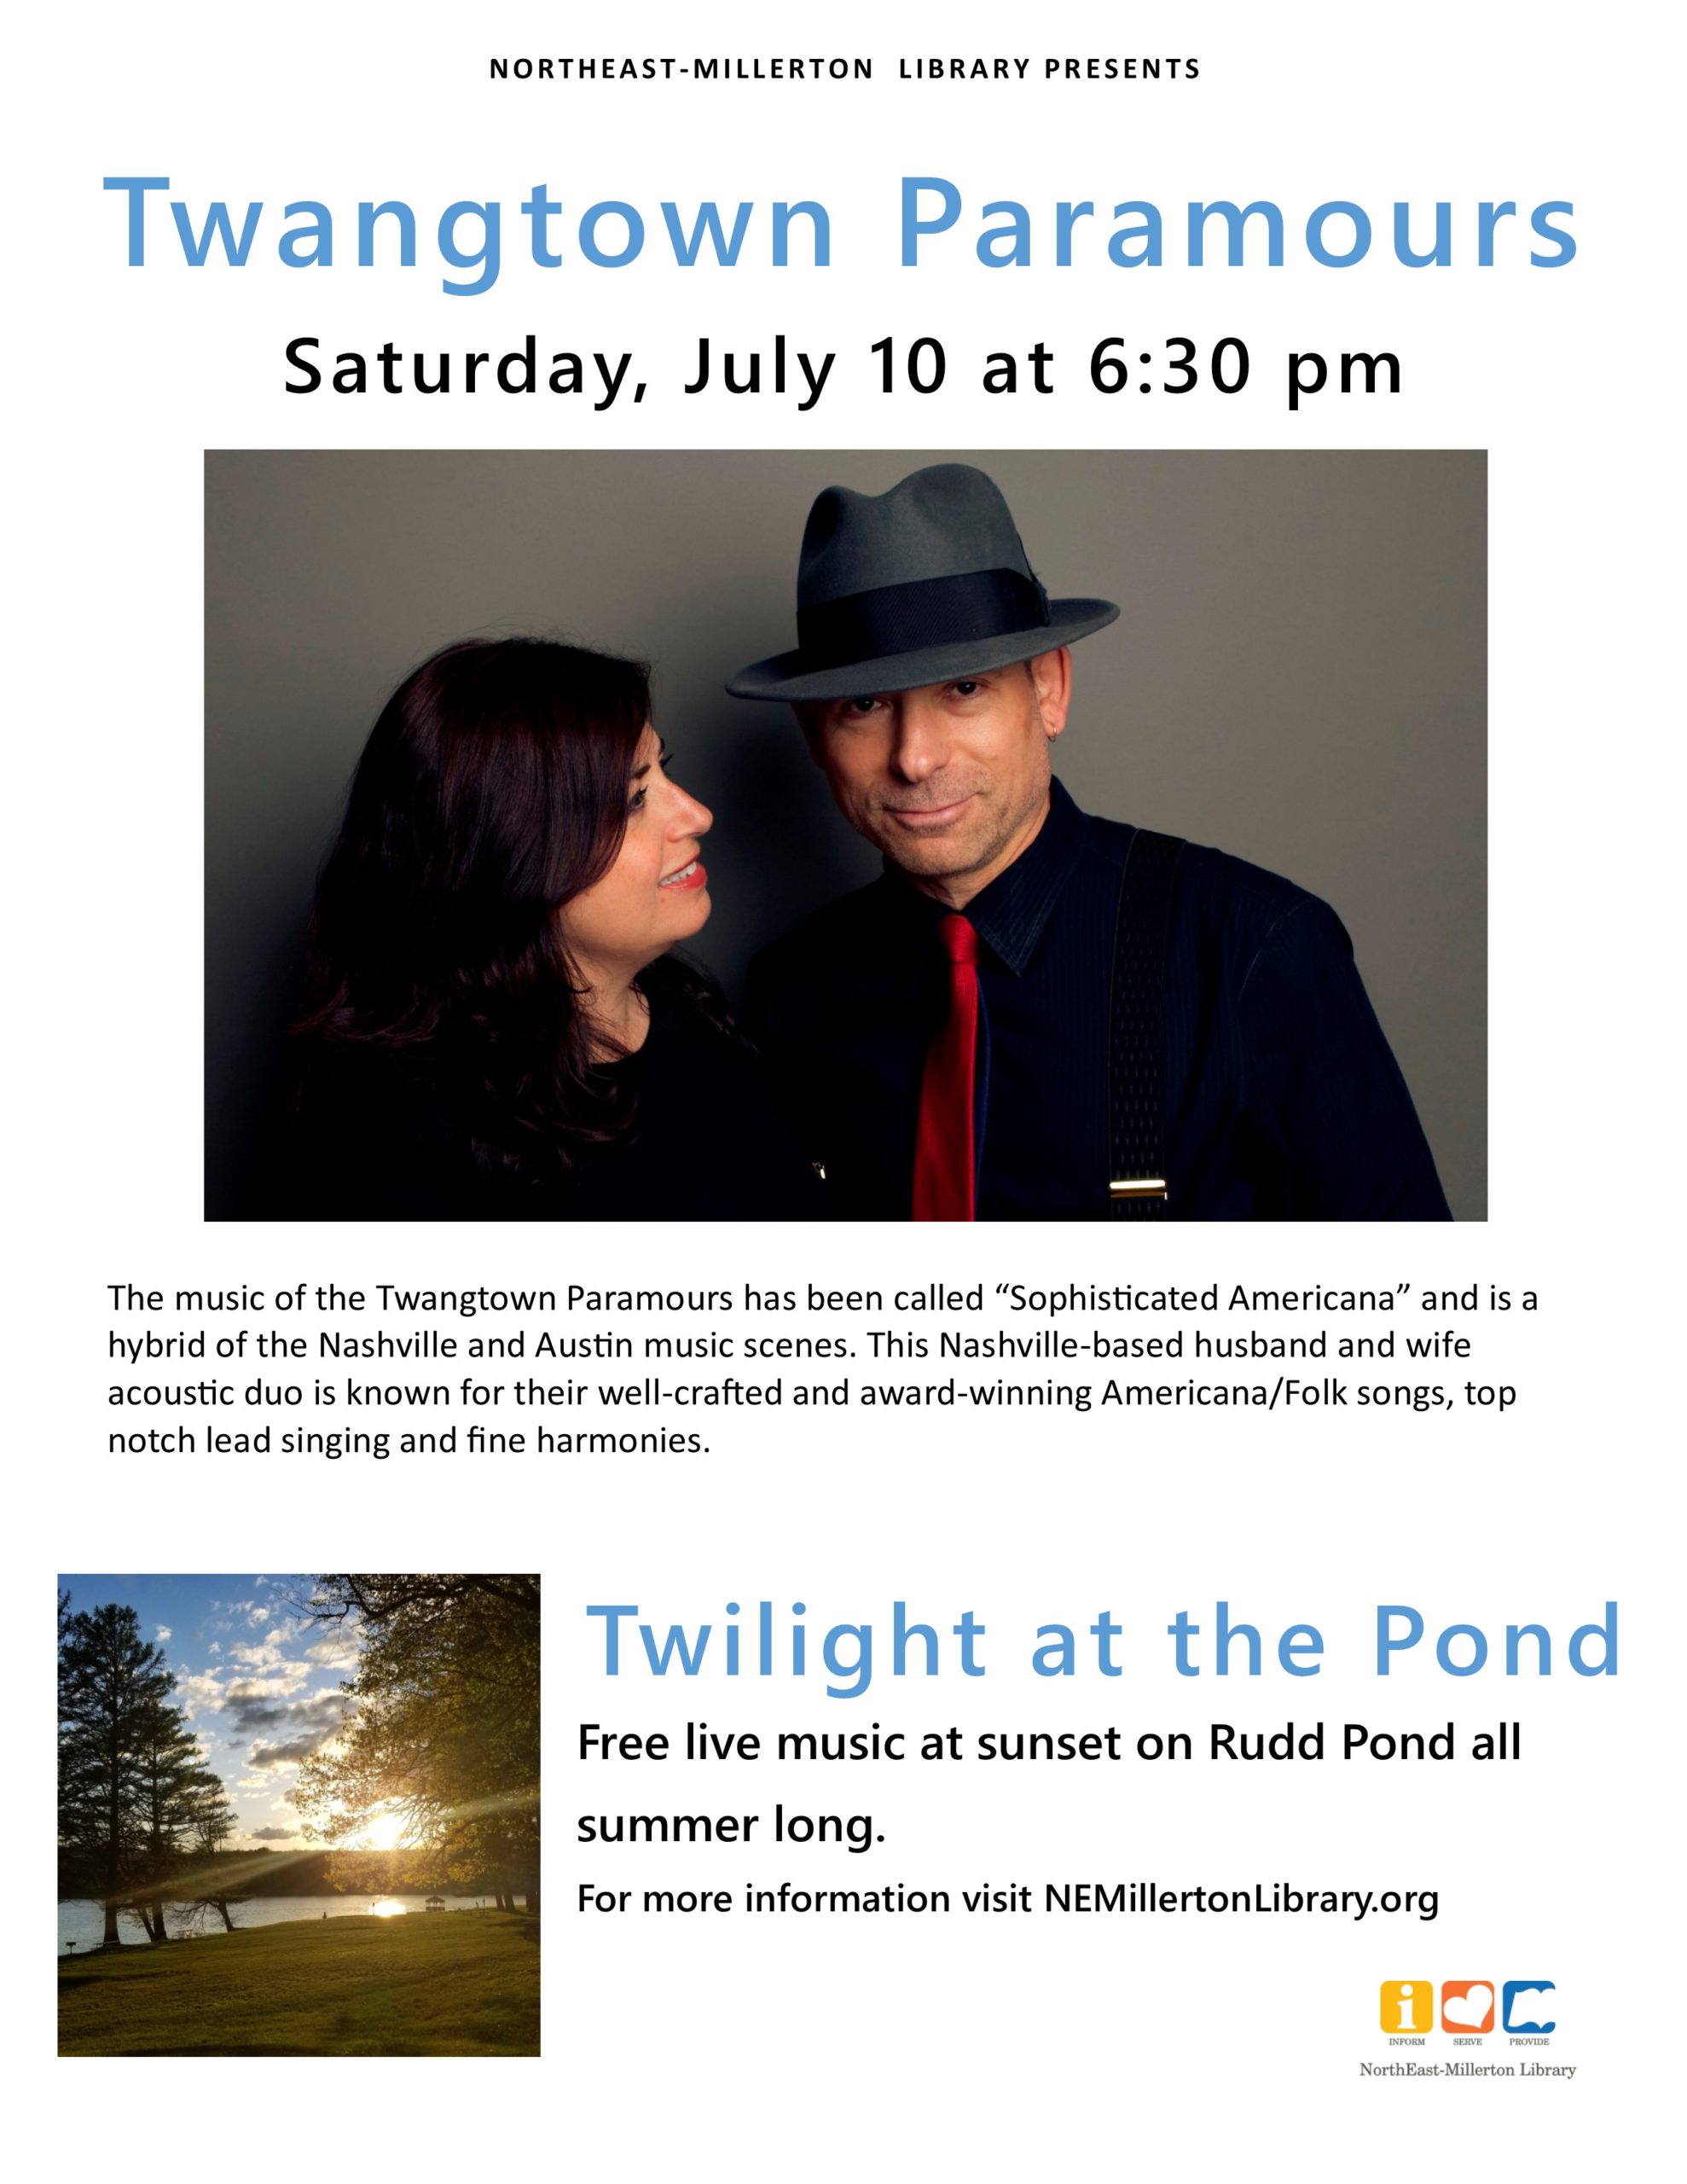 Twangtown Paramours July 10 6:30 pm Rudd Pond State Park